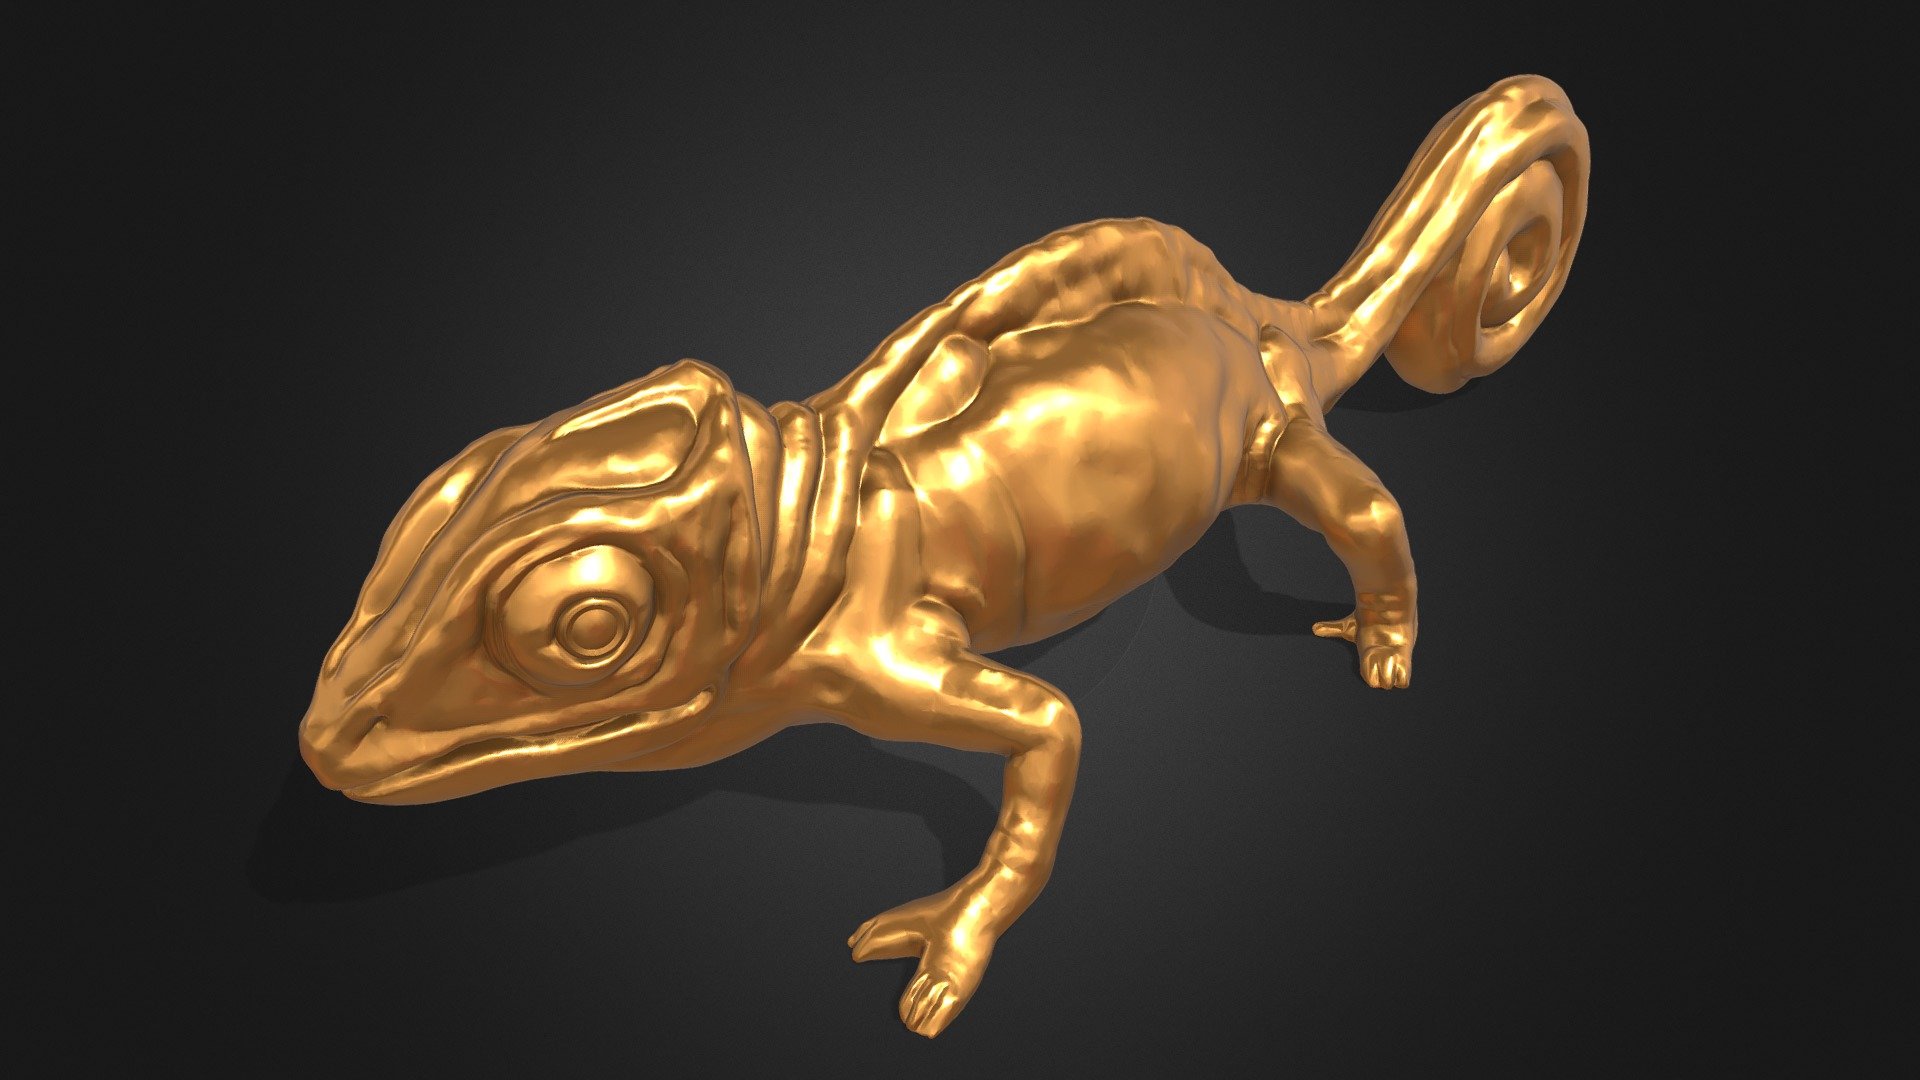 Realistic Animal with high resolution polygonal with gold material and Clear black background make it realistic and so cute.

Recomended For:


Basic modeling 
Rigging 
Sculpting 
Become Statue
Decorate
3D Print File
Toy
visualization

Have fun  :) - Gold Chameleon - Buy Royalty Free 3D model by Puppy3D 3d model